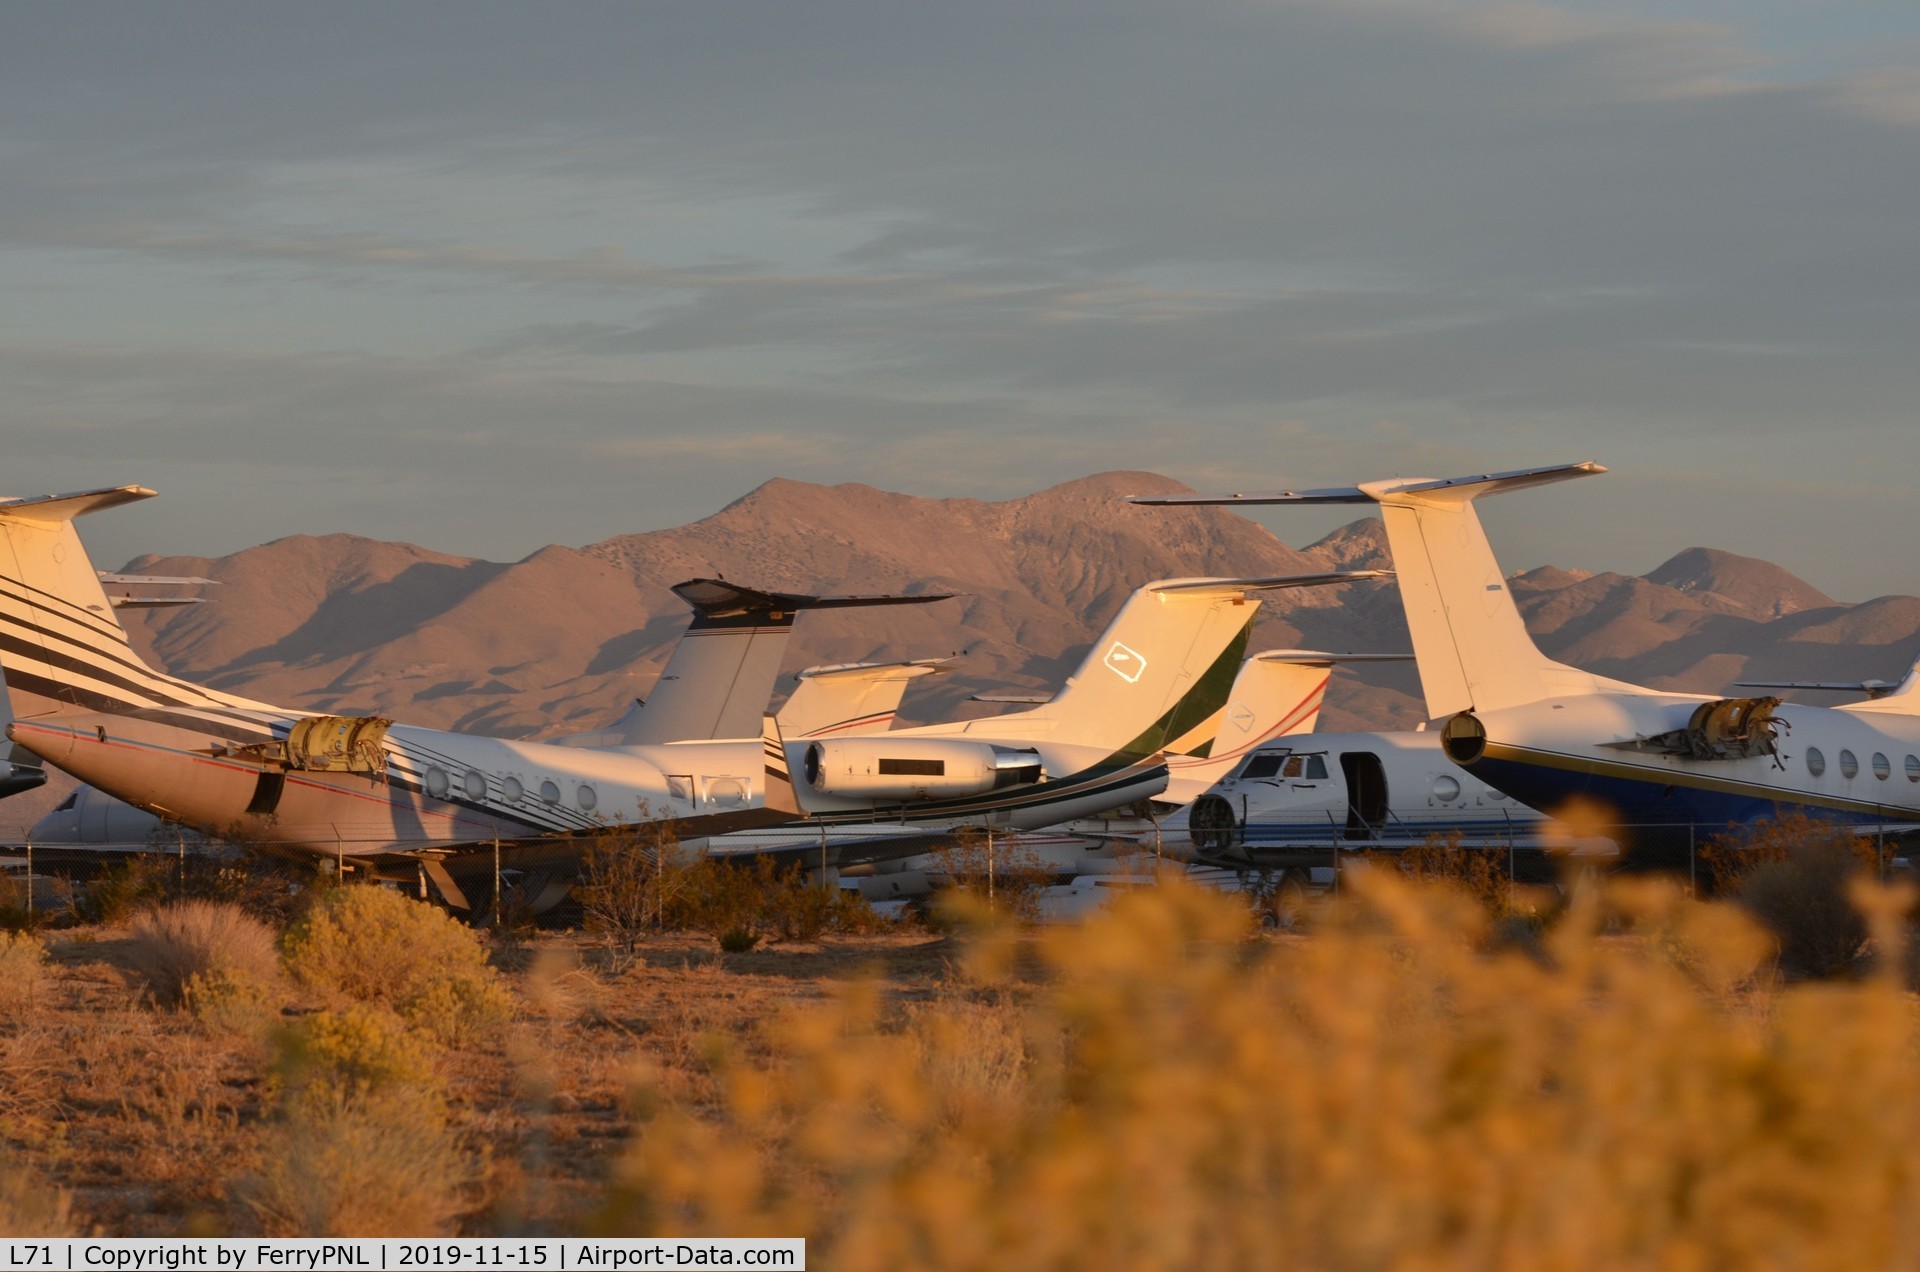 California City Municipal Airport (L71) - The place where the life of Gulfstreams end: California City